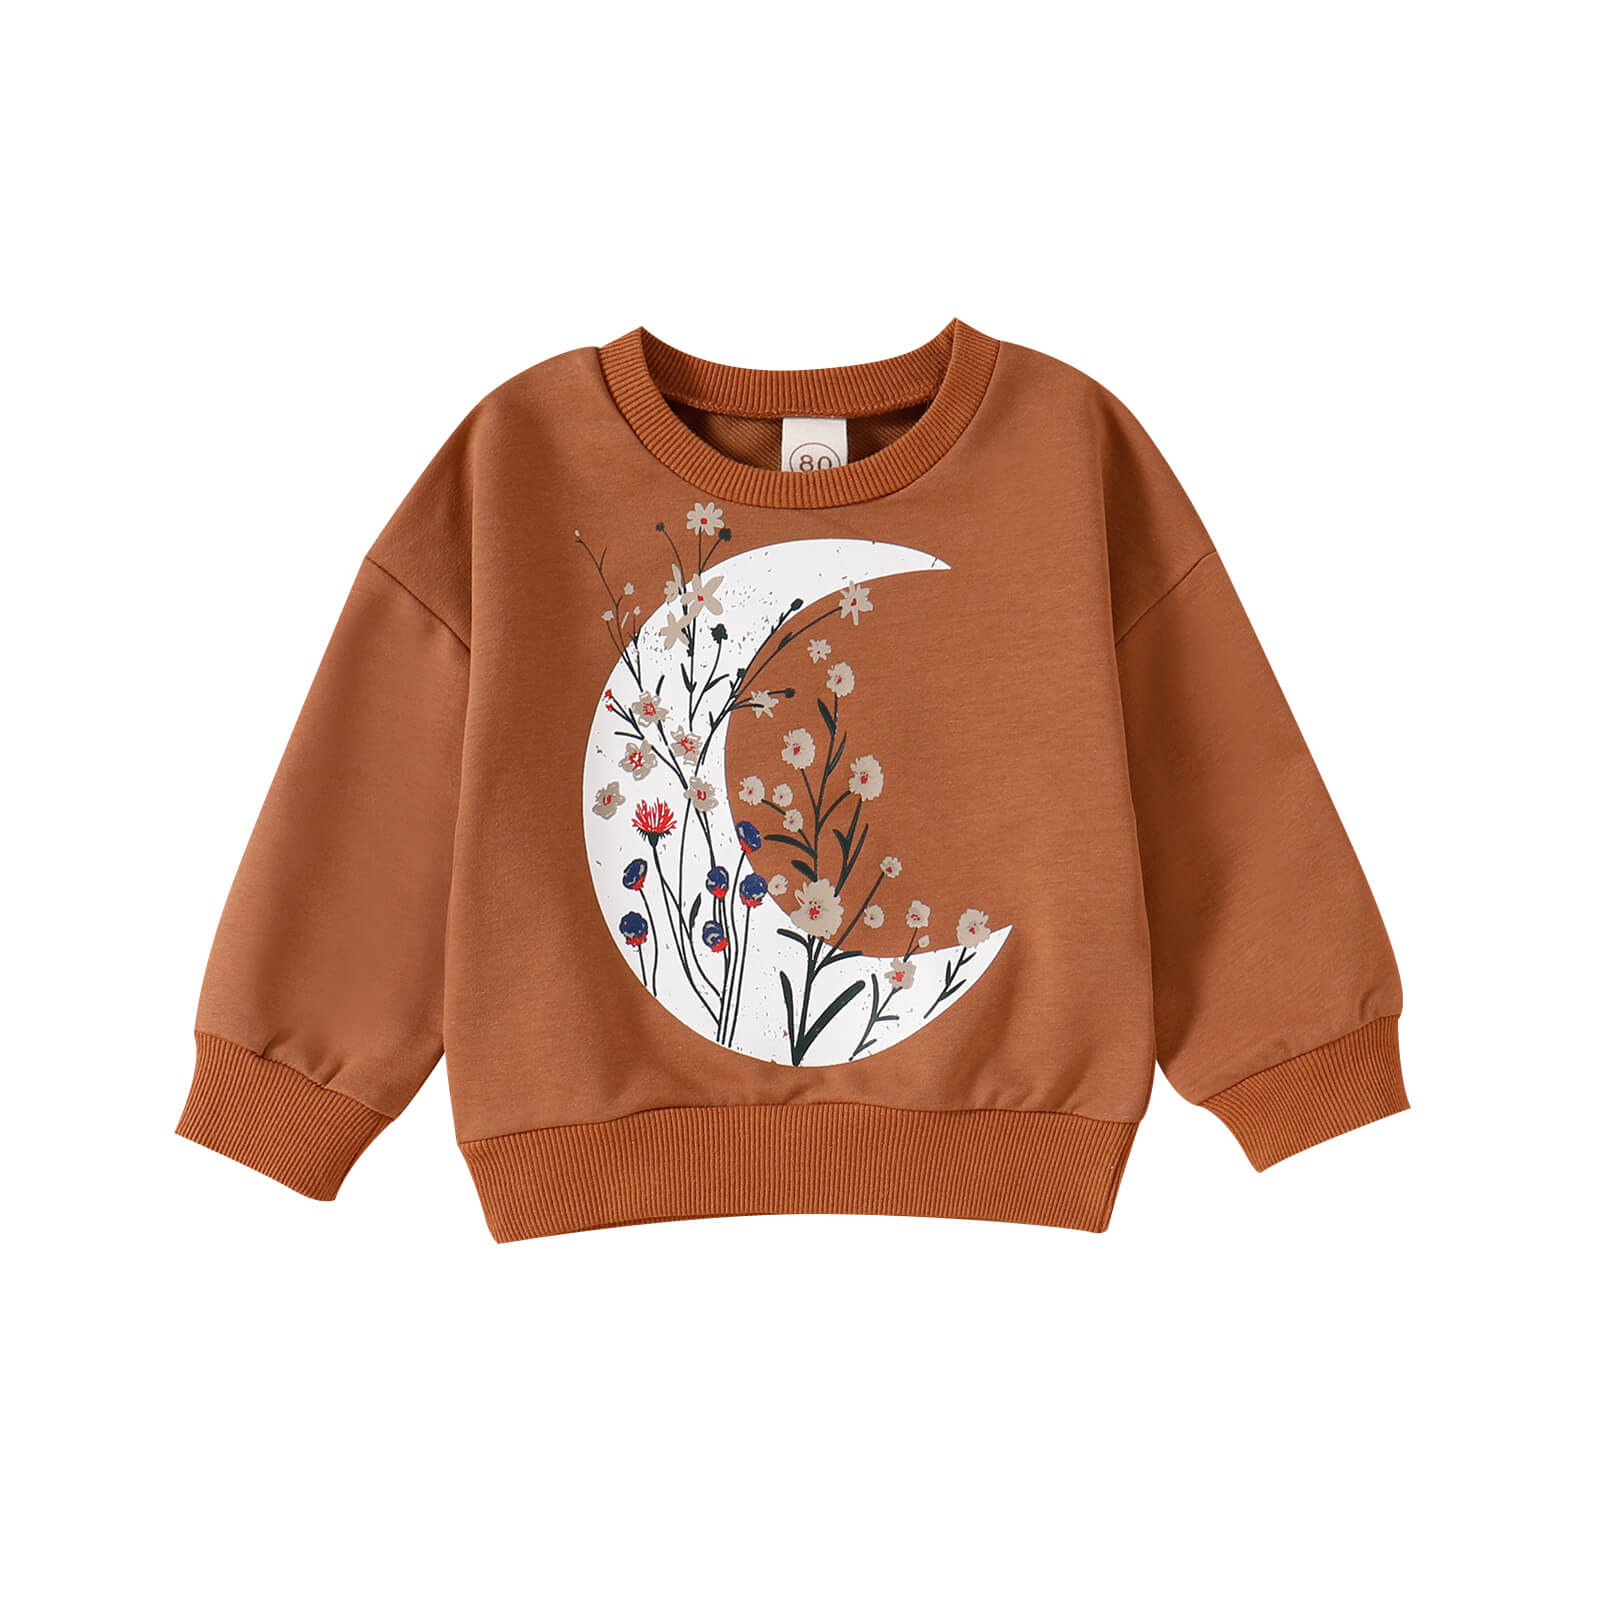 Toddler Moon Pullover.